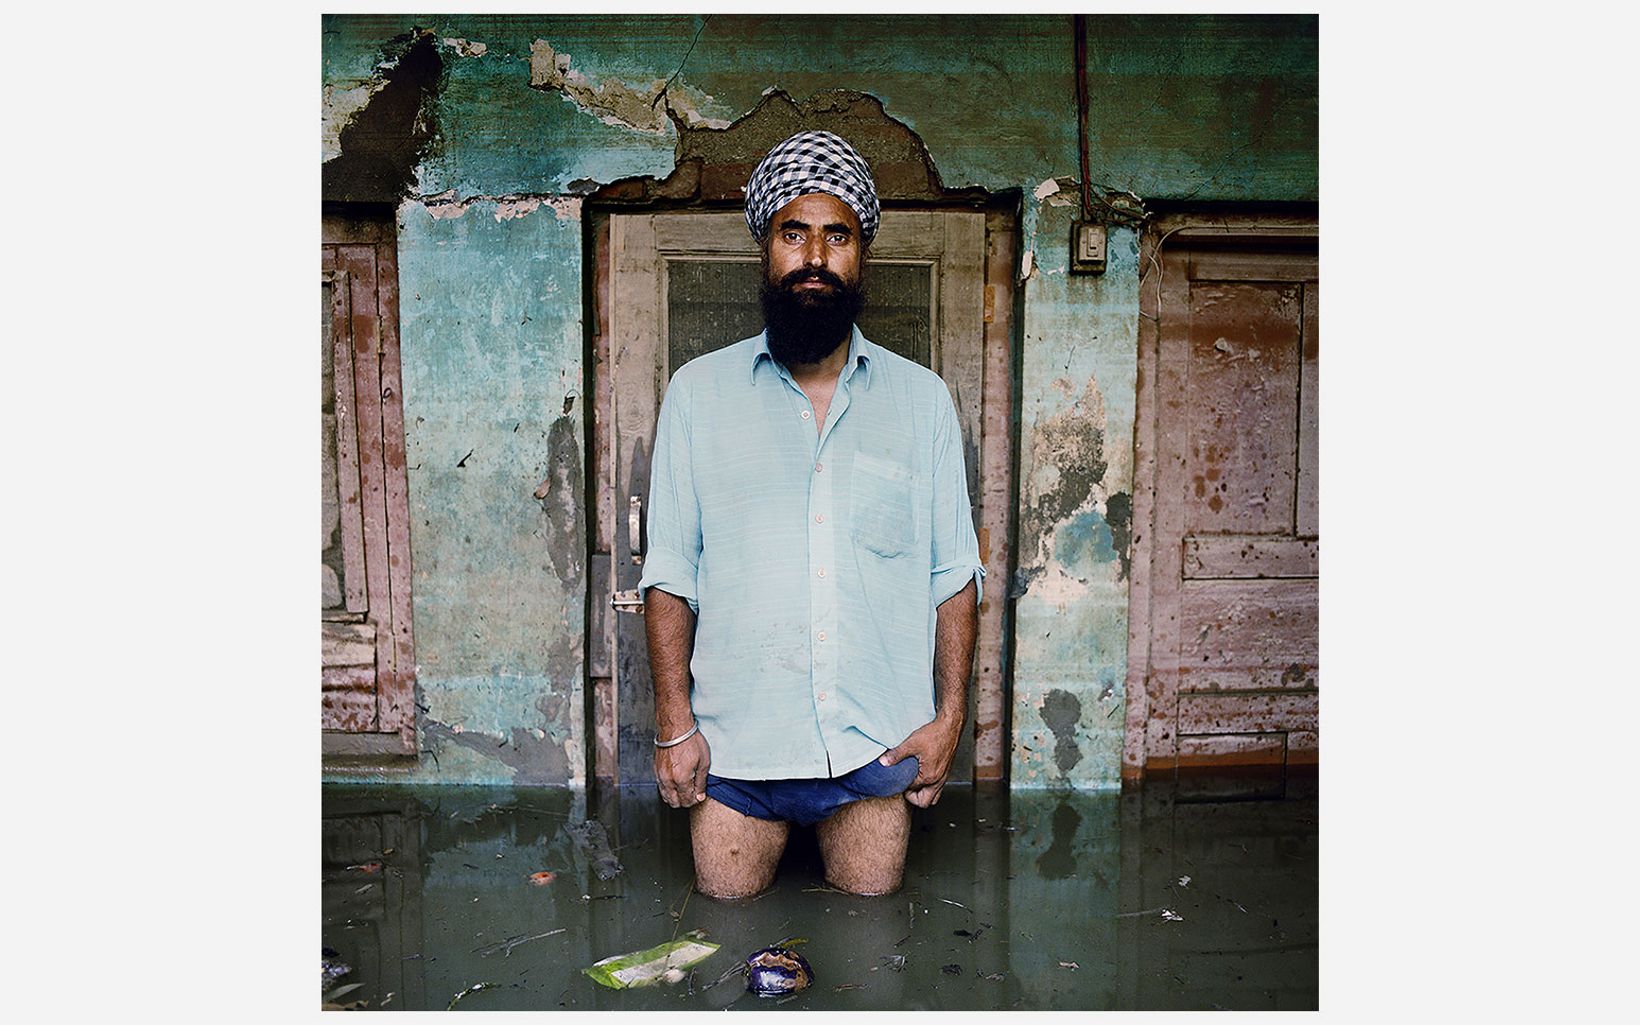 J.B. Singh stands in water deeper than his knees in Kashmir, India 